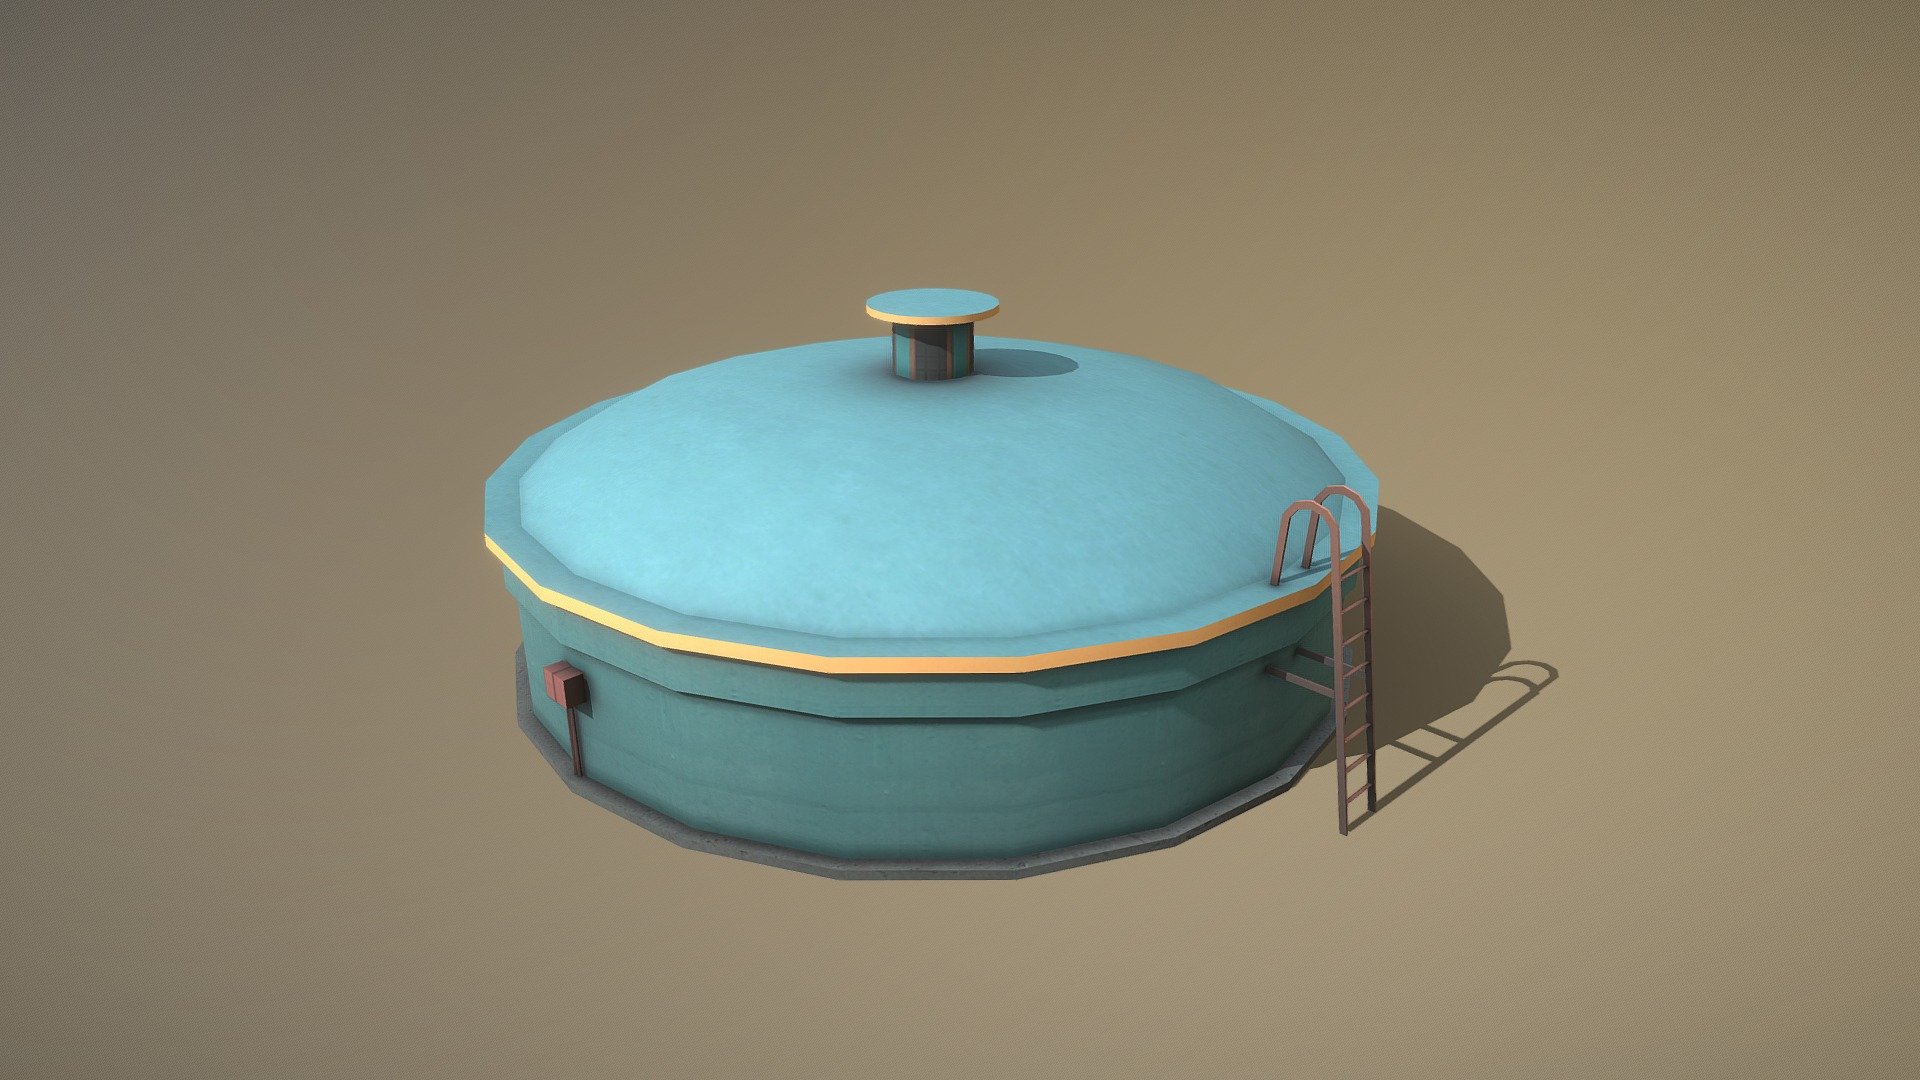 WBKK_WATERTANK Kota Kinabalu 


LOD0 - (triangles 728) / (points 425)

Low-poly 3D model for game 



Textures for standart shader (Diffuse, Gloss) they may be used with Unity3D, Unreal Engine. 



Textures:


WBKK_WATERTANK_diffuse.png    - 1024x1024
WBKK_WATERTANK_gloss.png  - 1024x1024



If you have questions about my models or need any kind of help, feel free to contact me and i'll do my best to help you 3d model